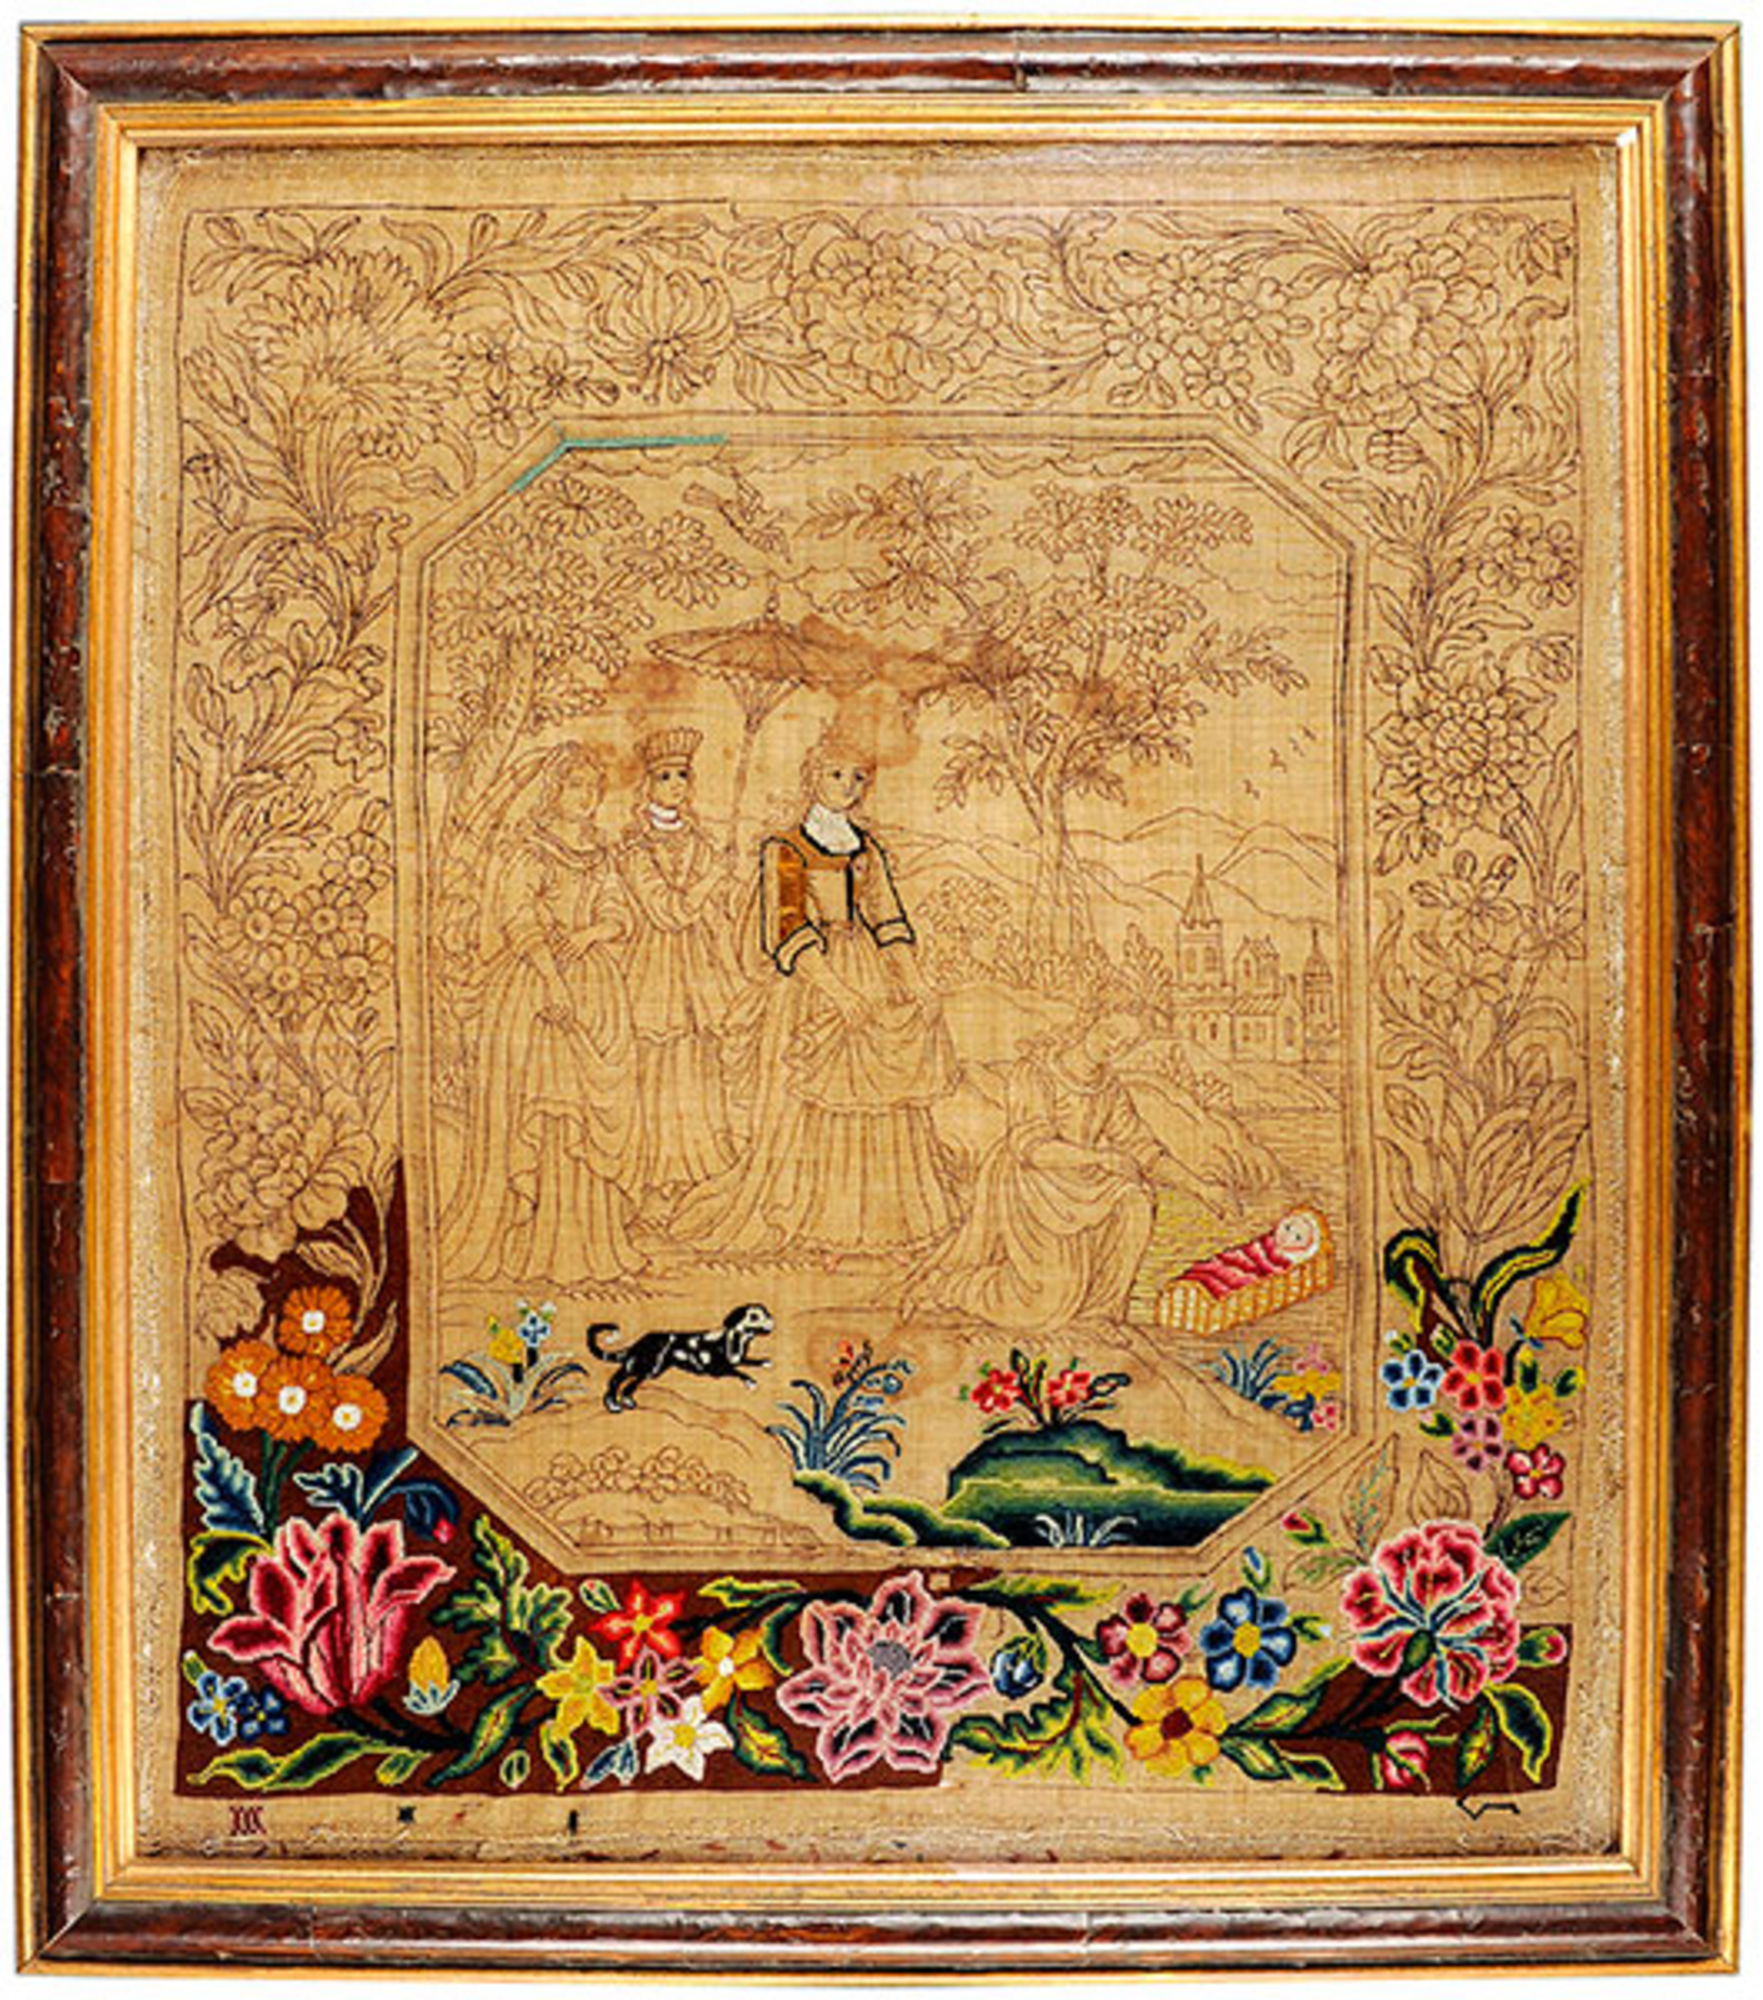 Unfinished Embroidery Panel. English. Circa 1720.